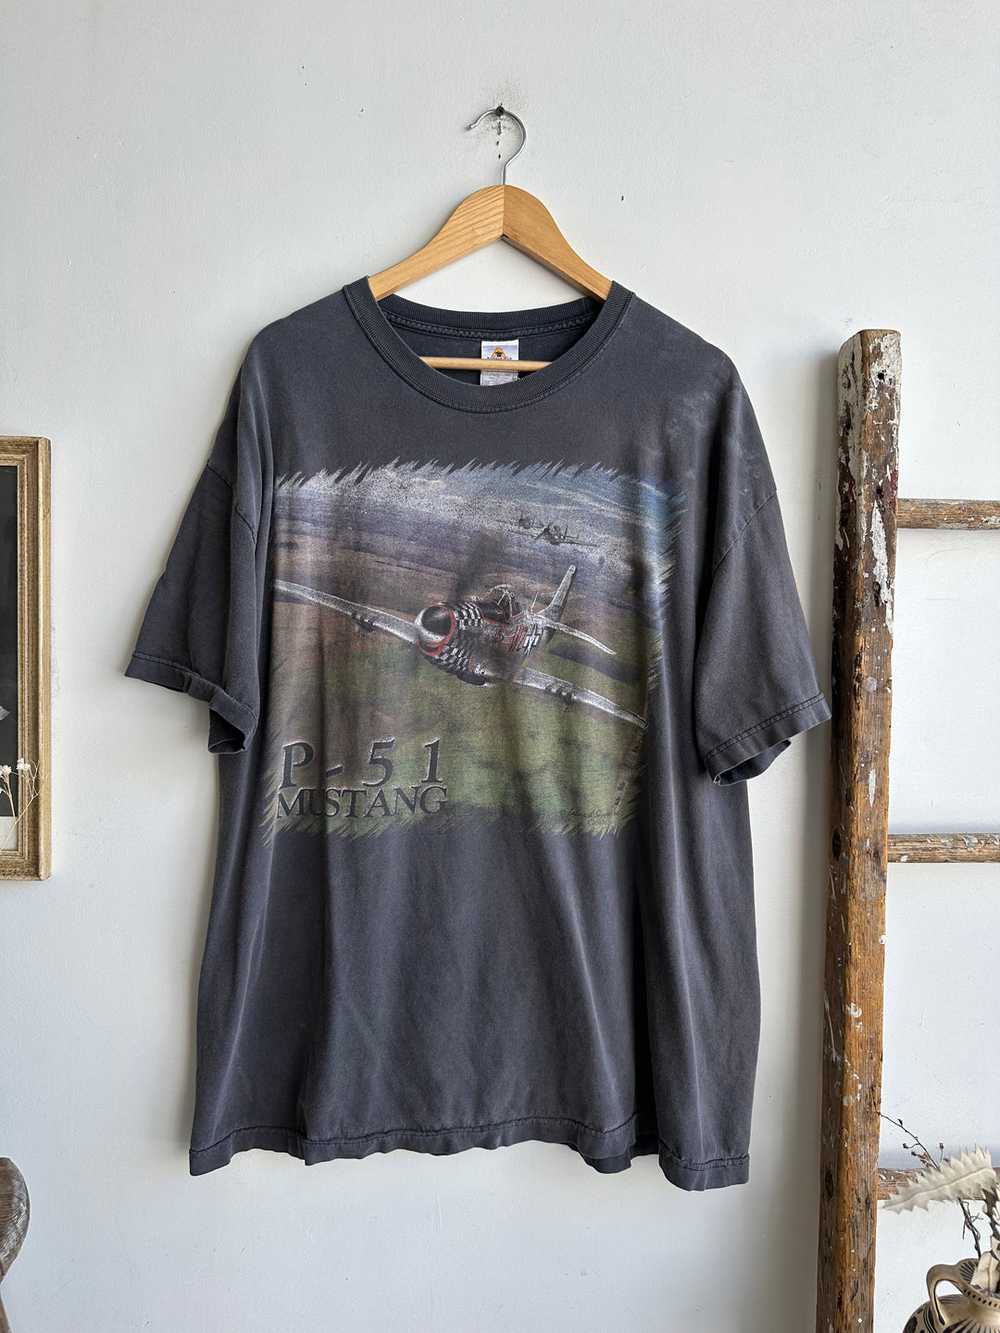 1990s Faded P-51 Mustang Jet Tee (XXL) - image 2